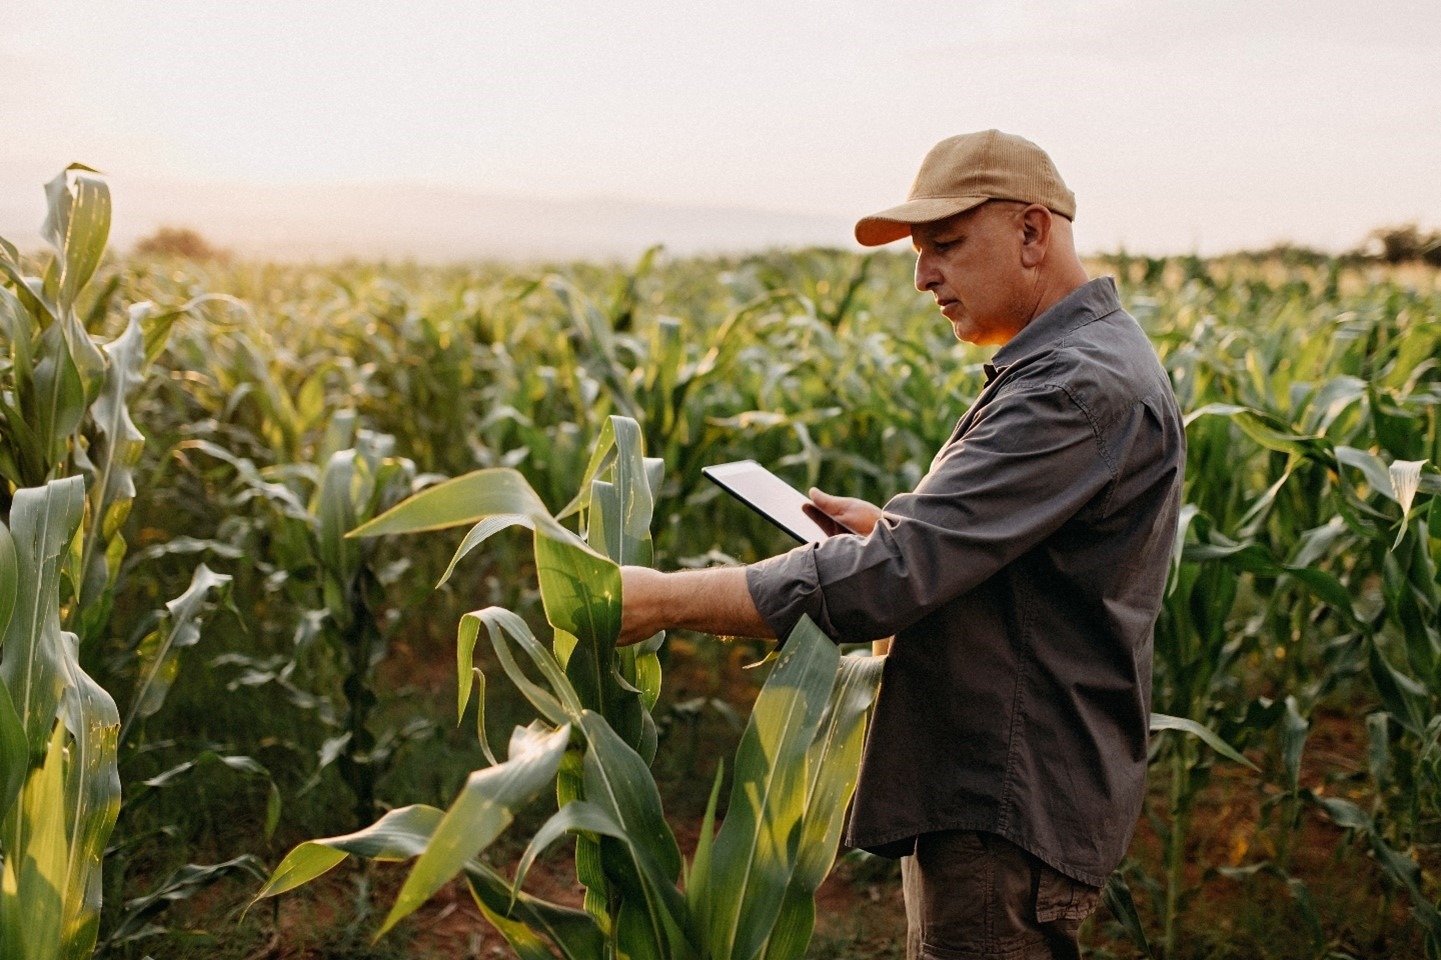 Evolving Microsoft Azure Data Manager for Agriculture to transform data into intuitive insights